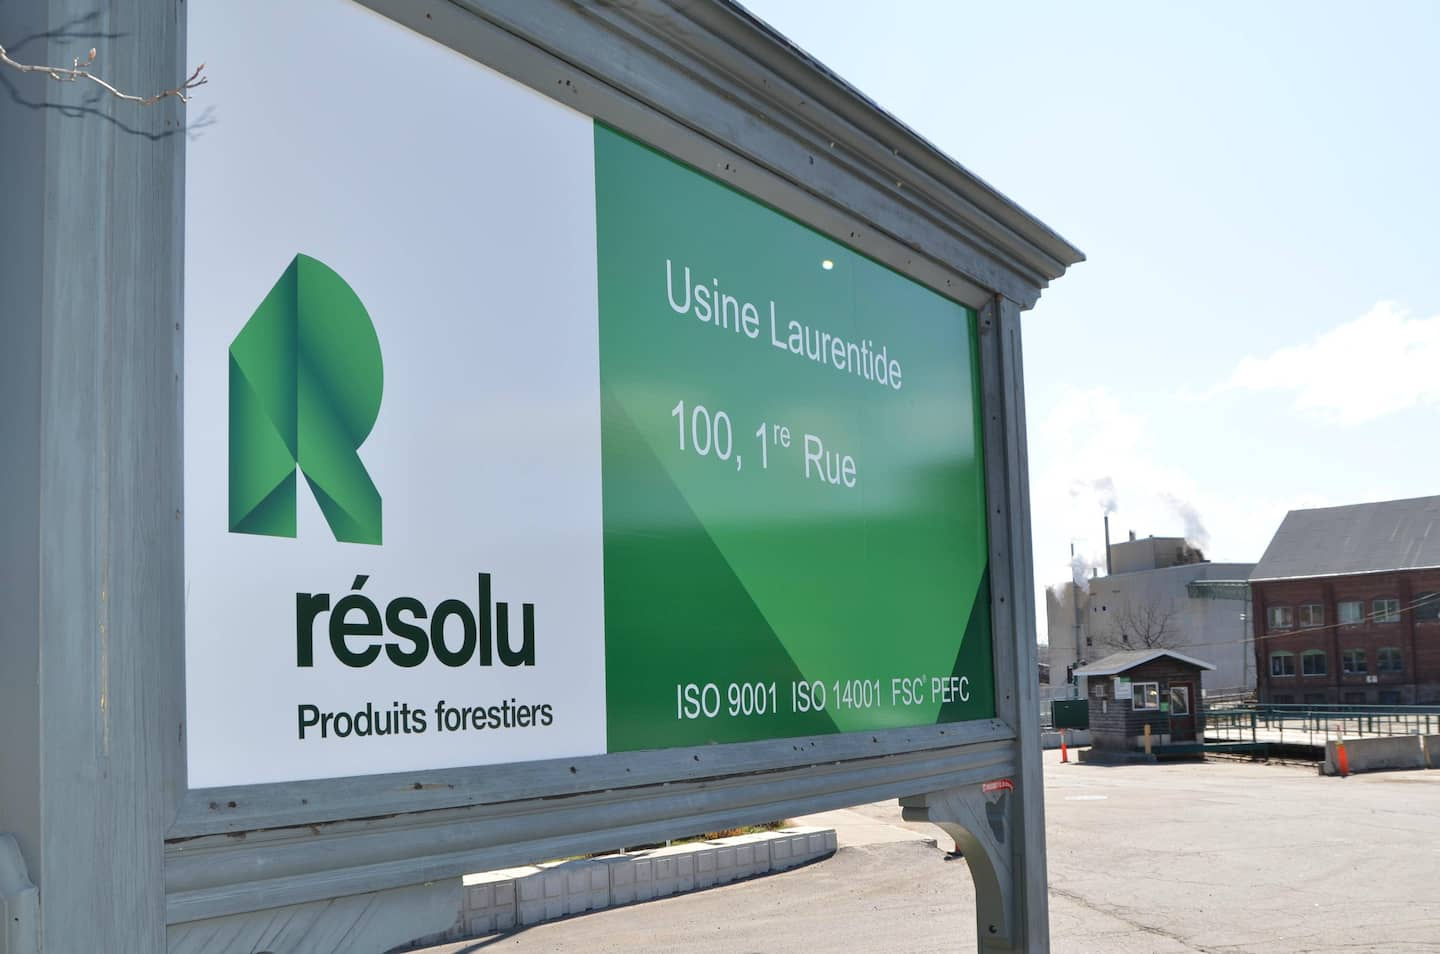 Domtar acquires Resolute Forest Products